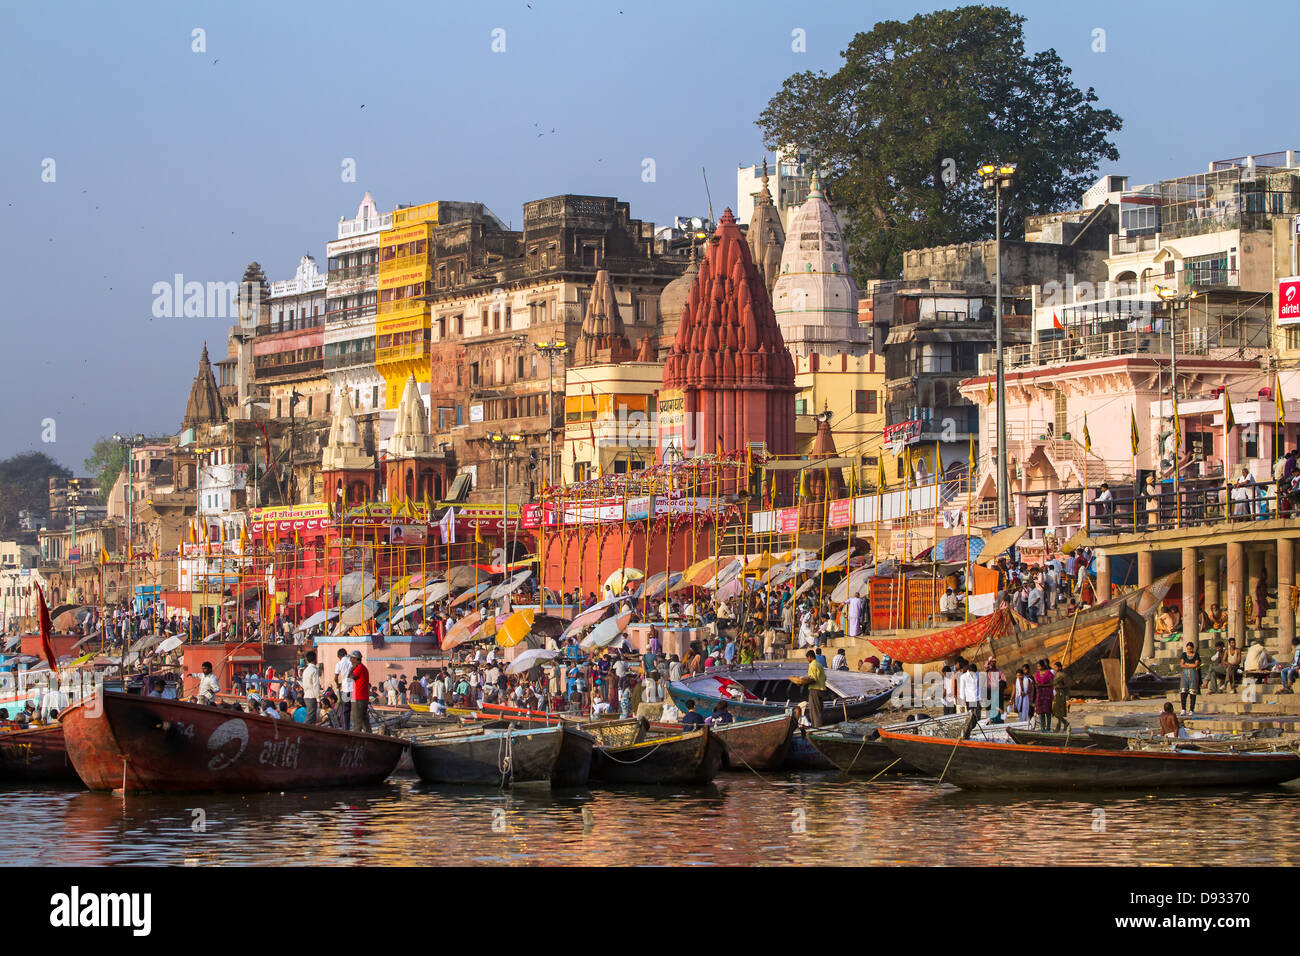 Ghats on the banks of Ganges river in holy city of Varanasi Stock Photo